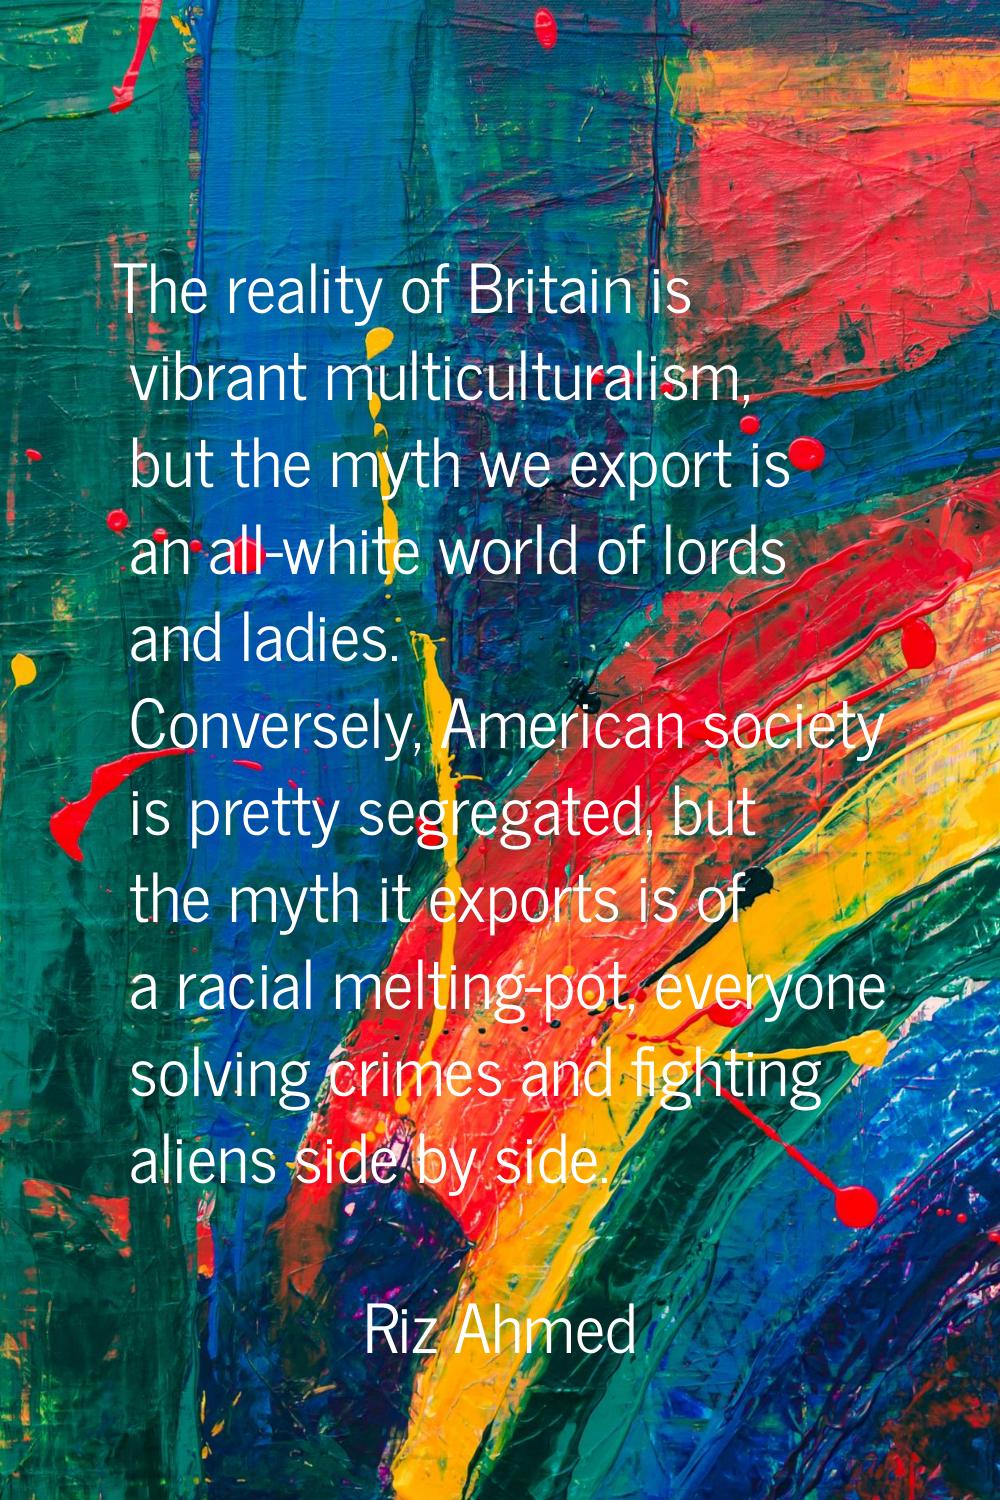 The reality of Britain is vibrant multiculturalism, but the myth we export is an all-white world of